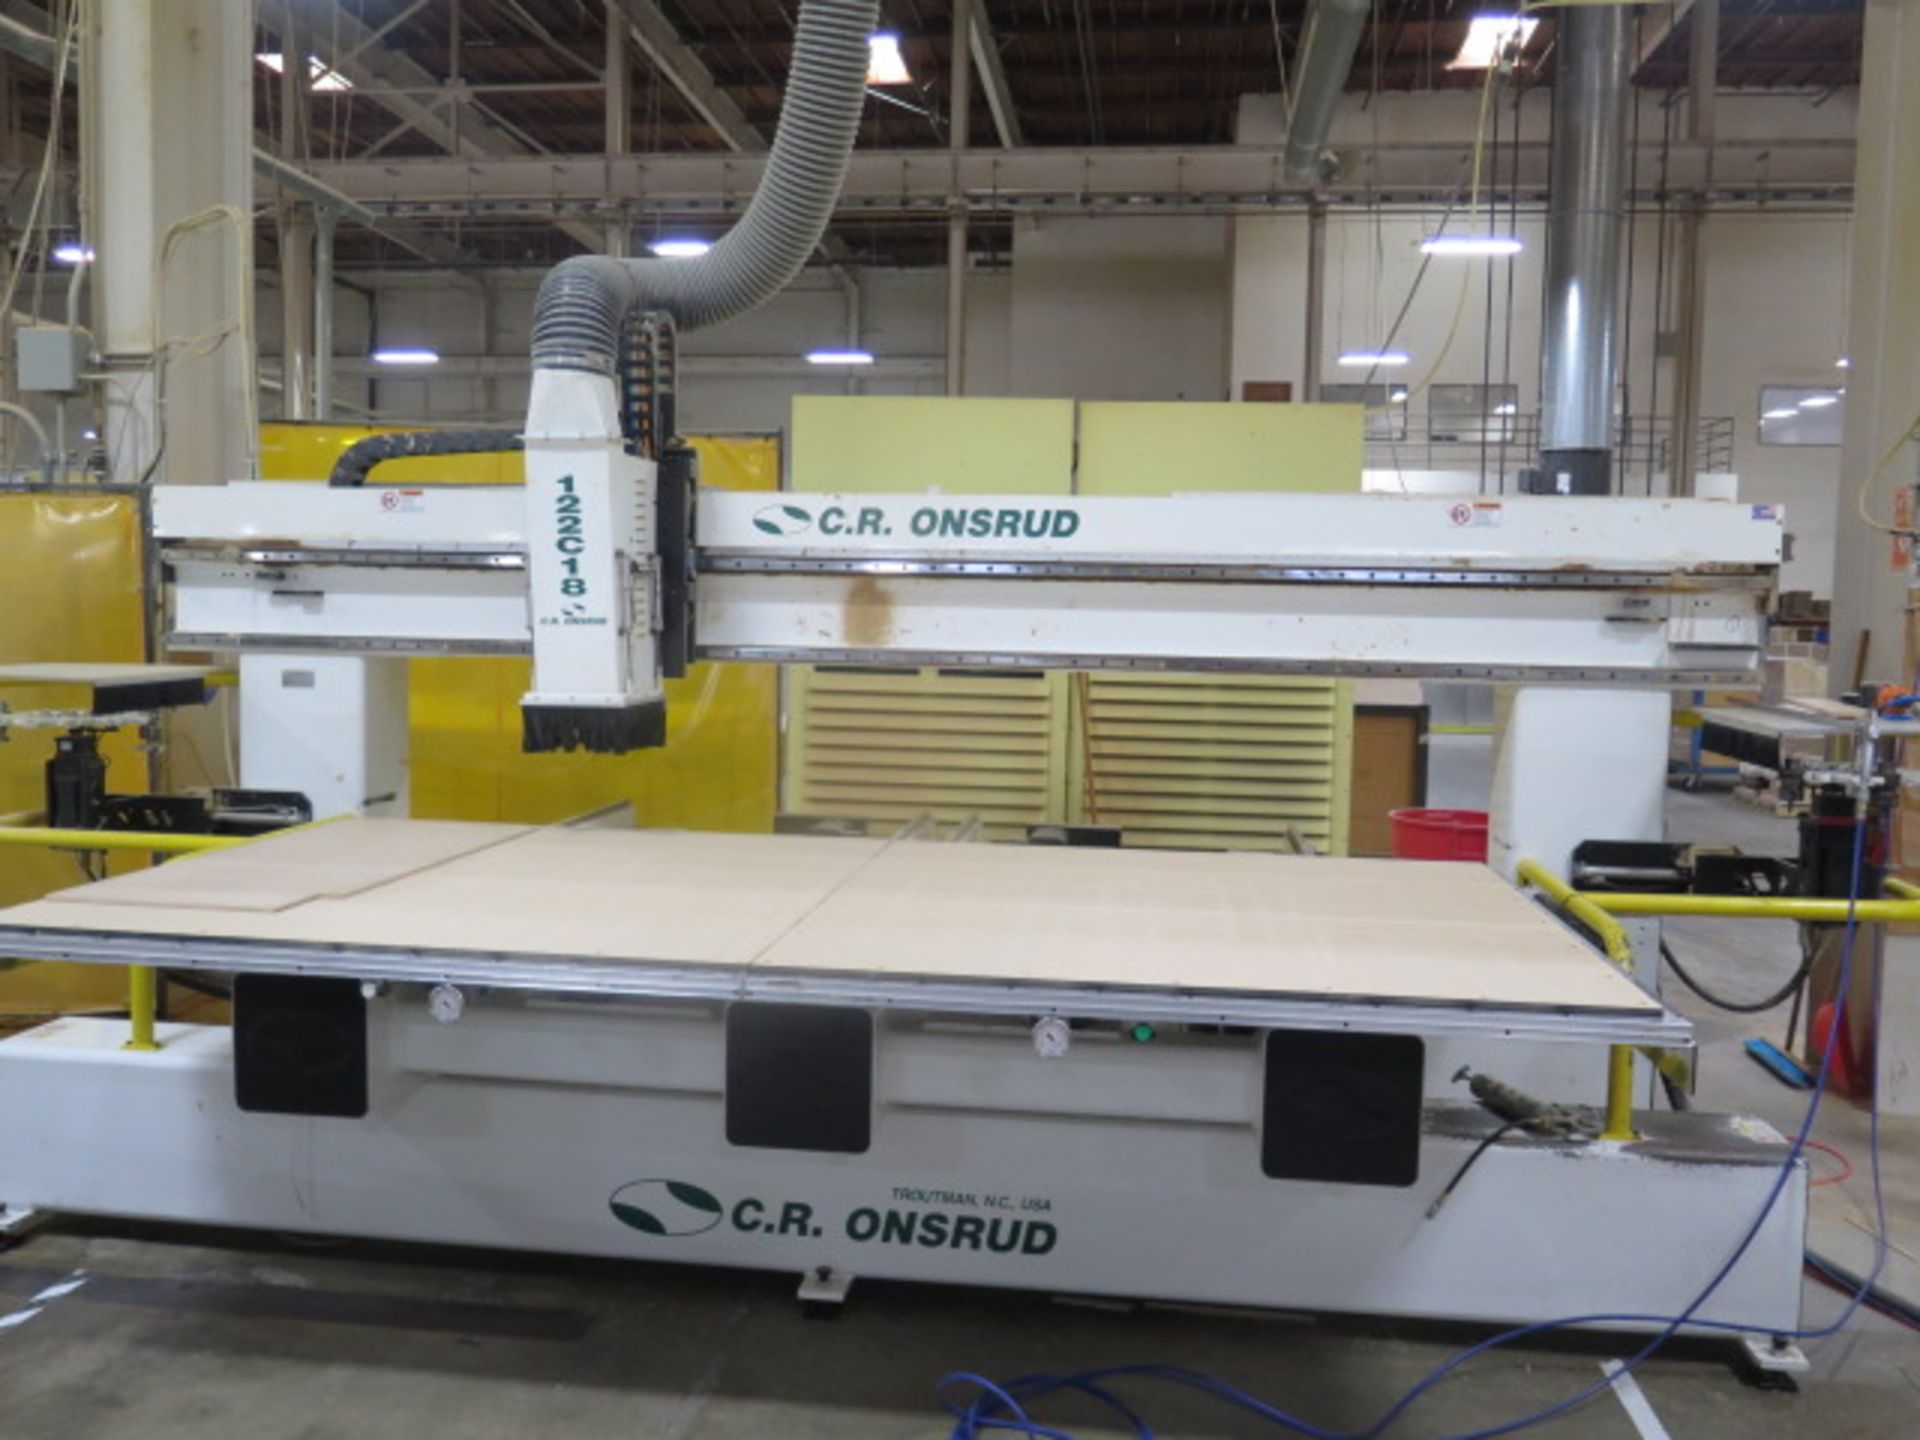 2008 C.R. Onsrud 122C18 CNC Router s/n 12280701 w/ WinMedia CNC Controls, SOLD AS IS - Image 2 of 18